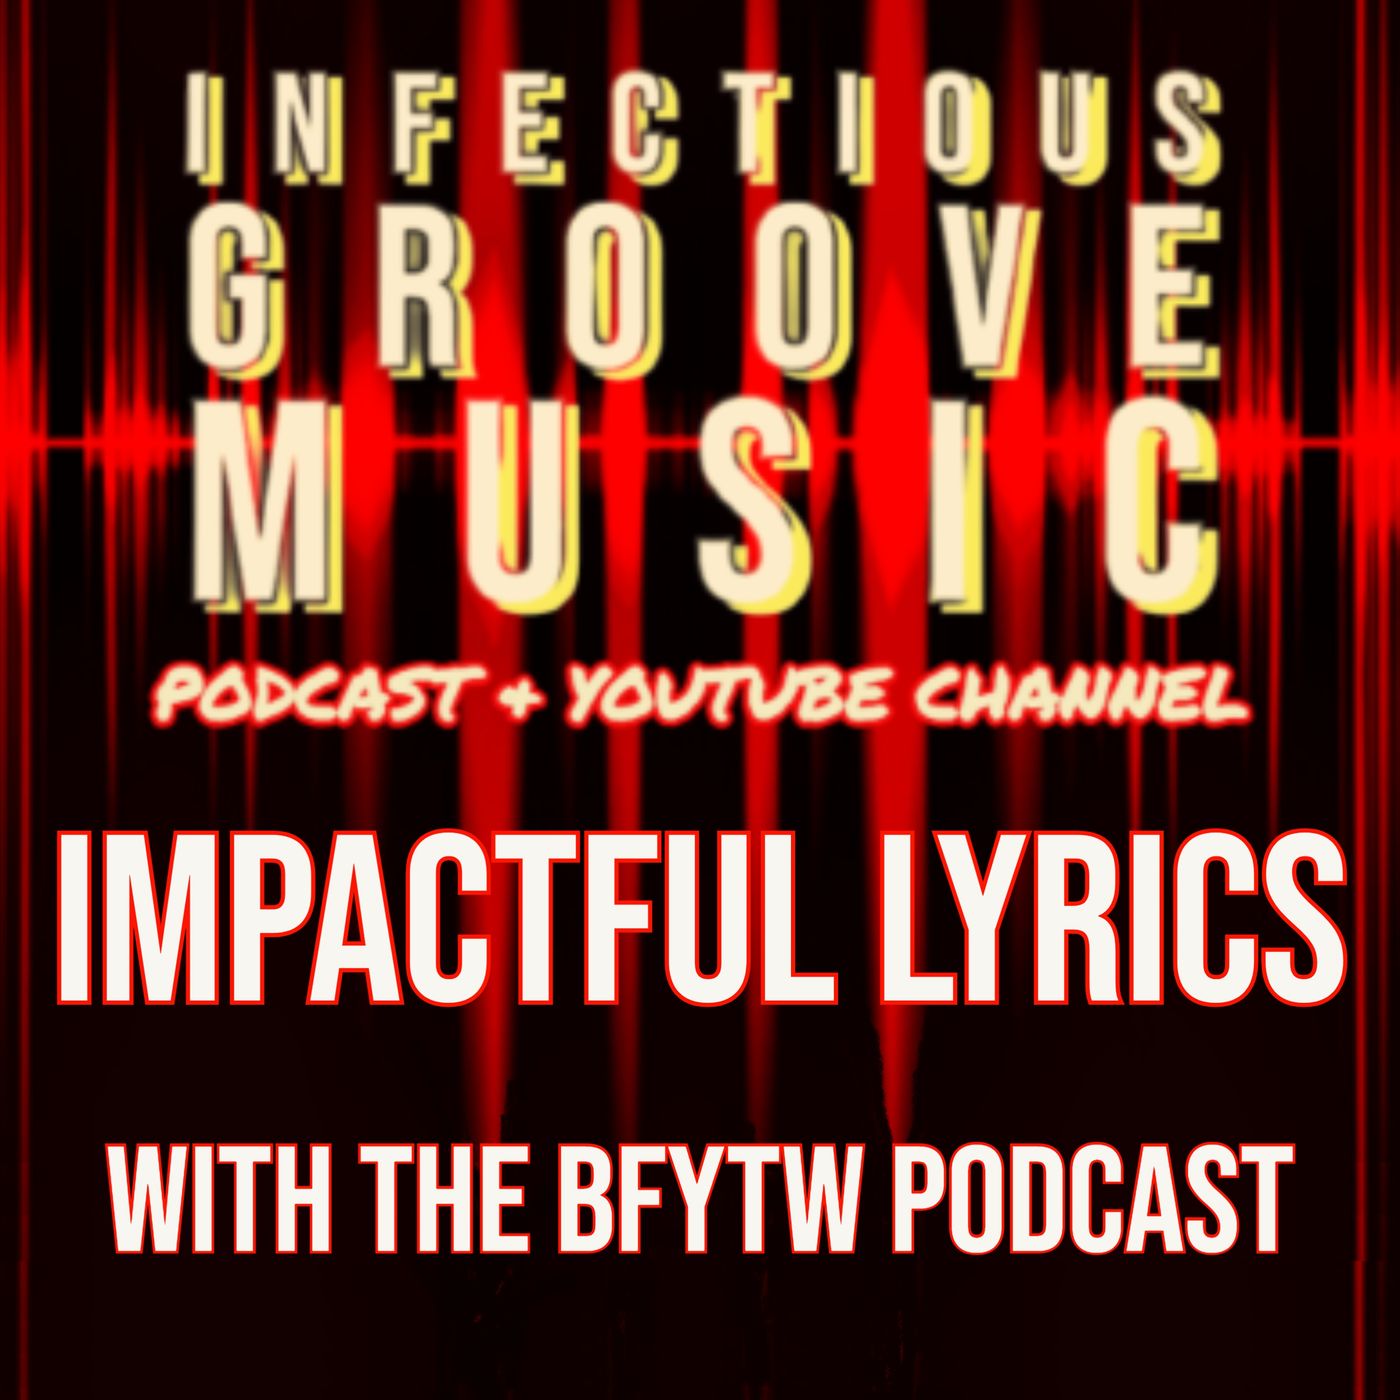 Lyrics With The Biggest Impact On Our Lives with BFYTW Podcast